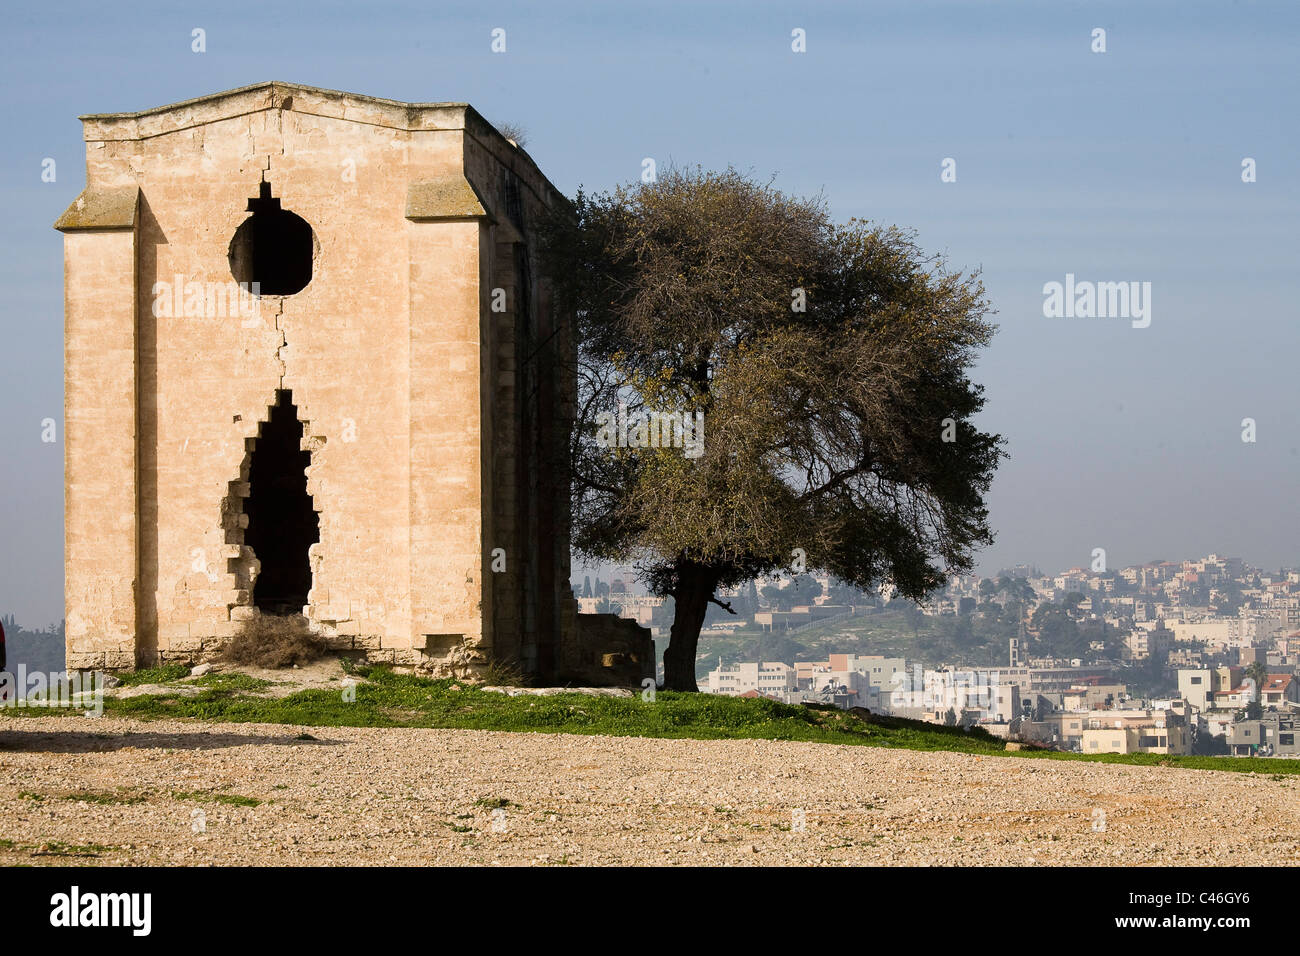 Photograph of the ruined church of Mary's fear near the city of Nazareth in the Lower Galilee Stock Photo